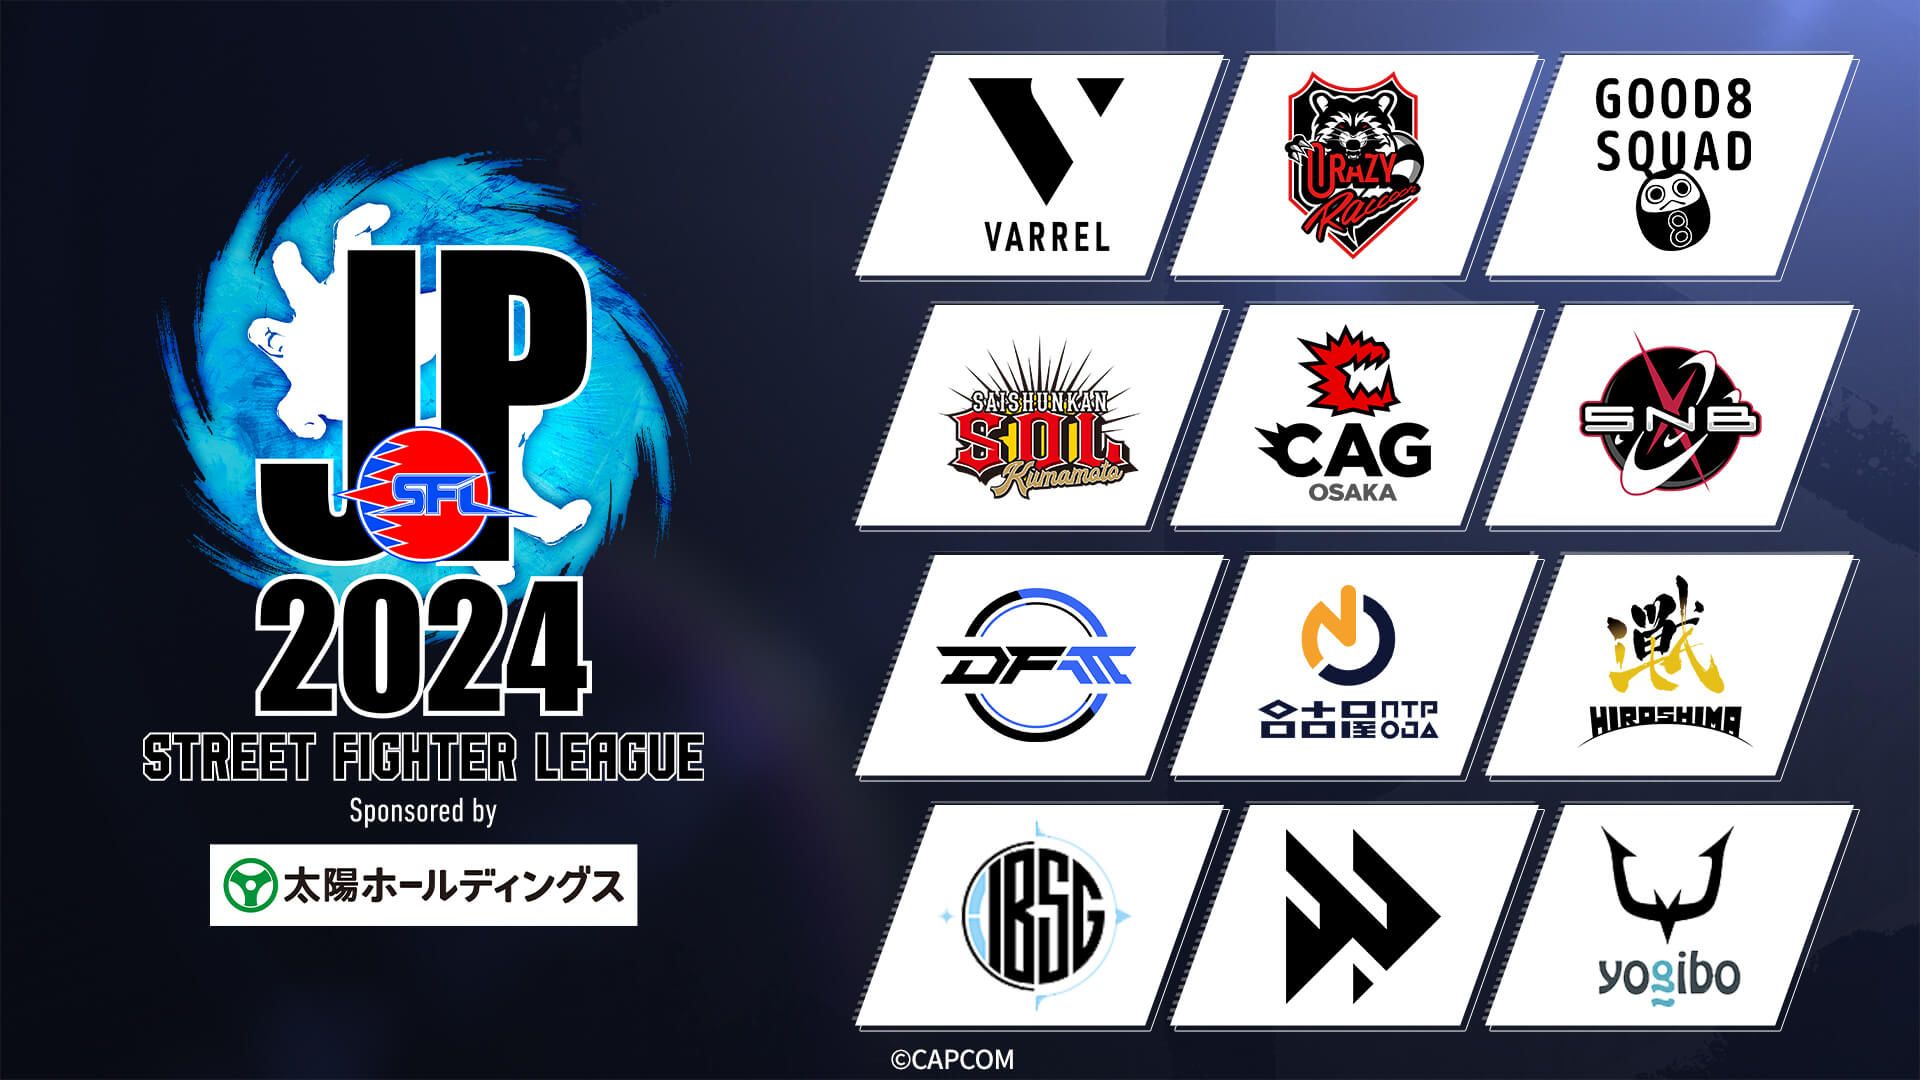 Crazy Raccoon & Reject Release Rosters For Street Fighter League Japan